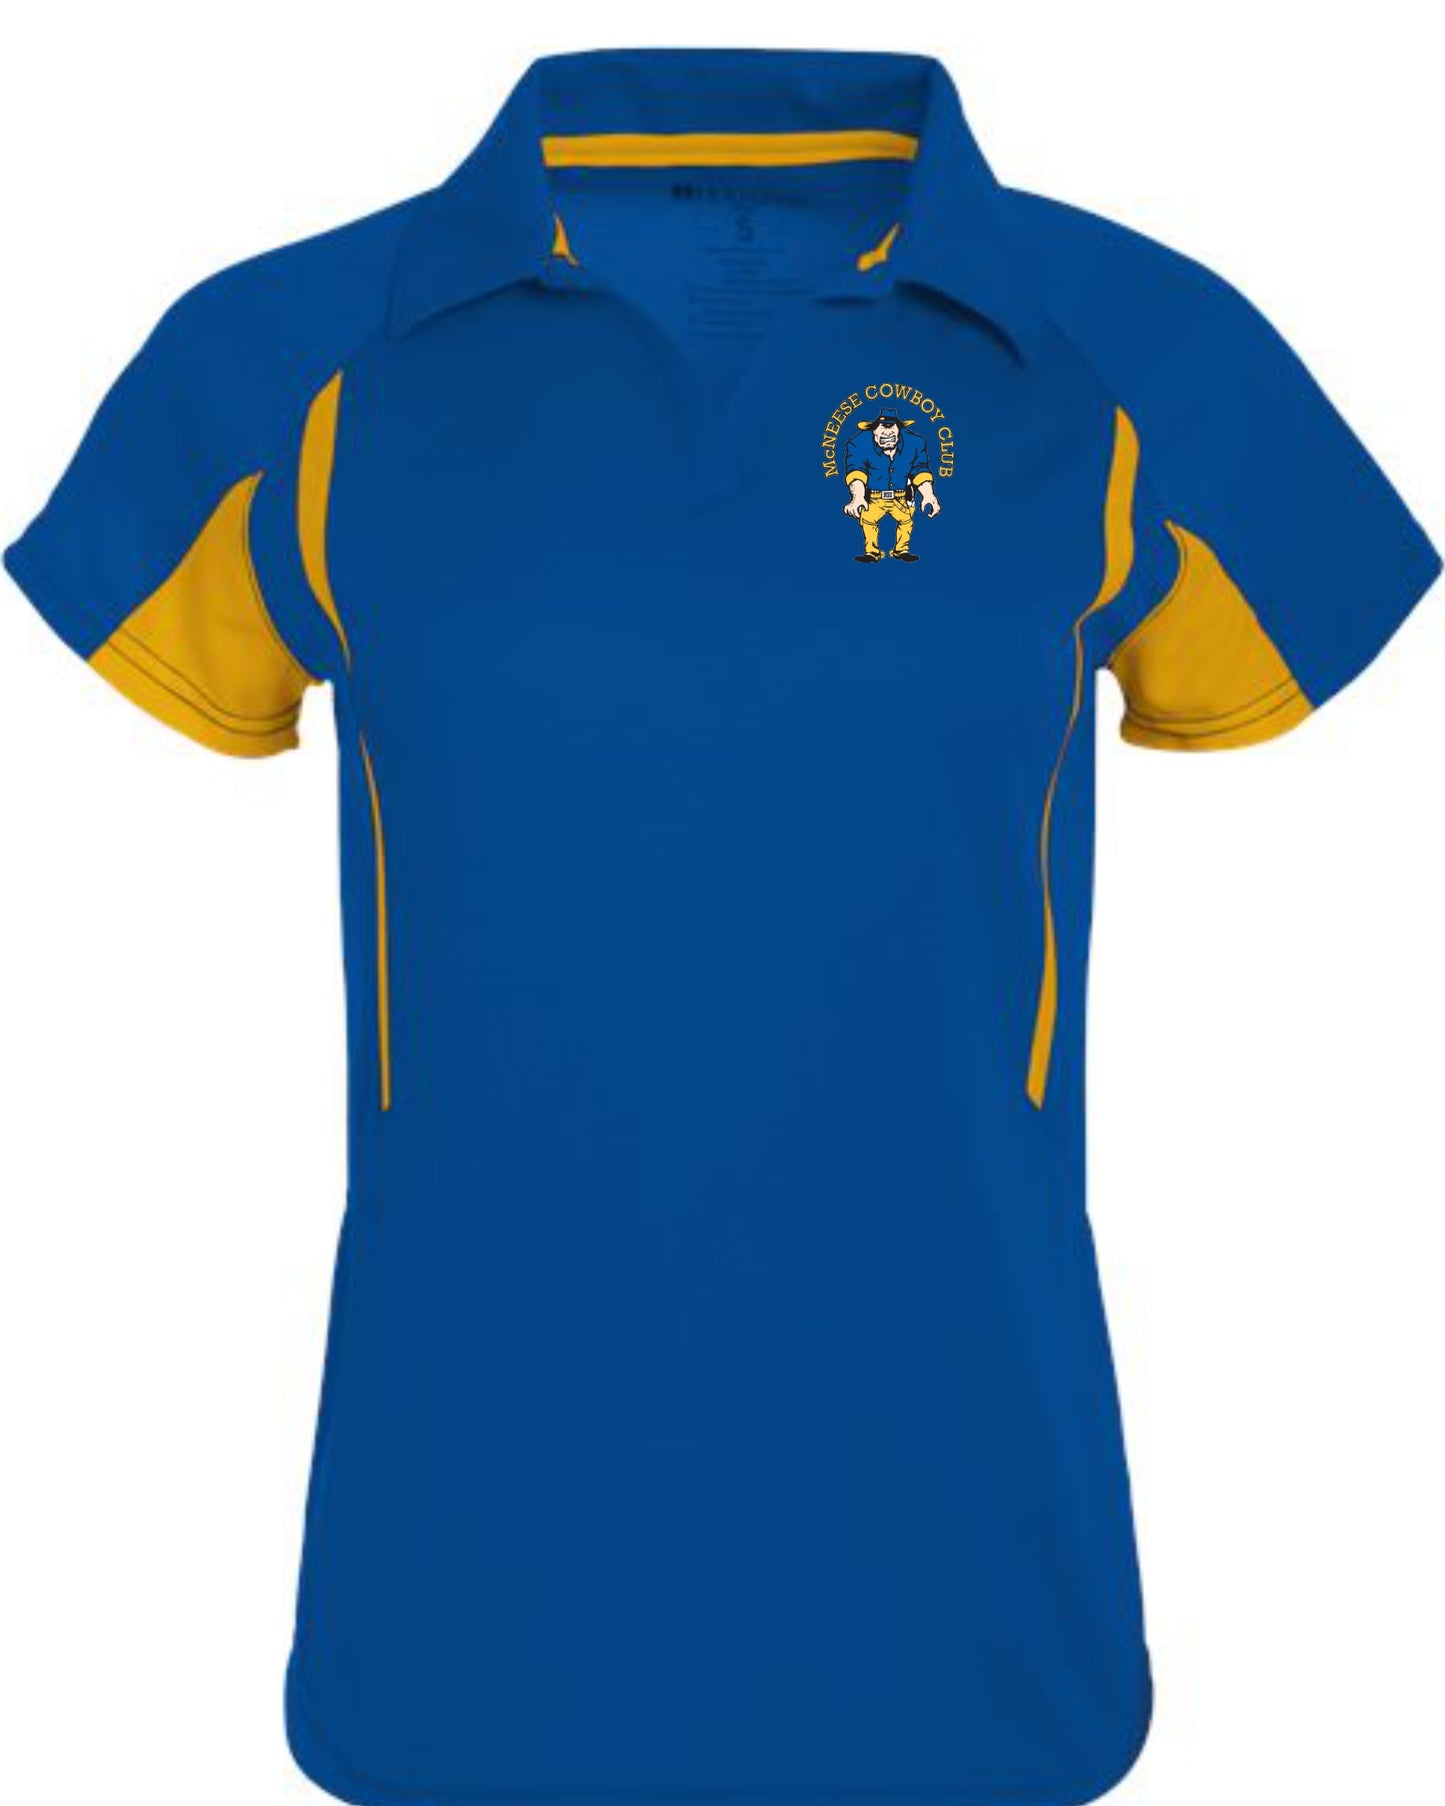 # Custom Product for the McNeese Cowboy Club